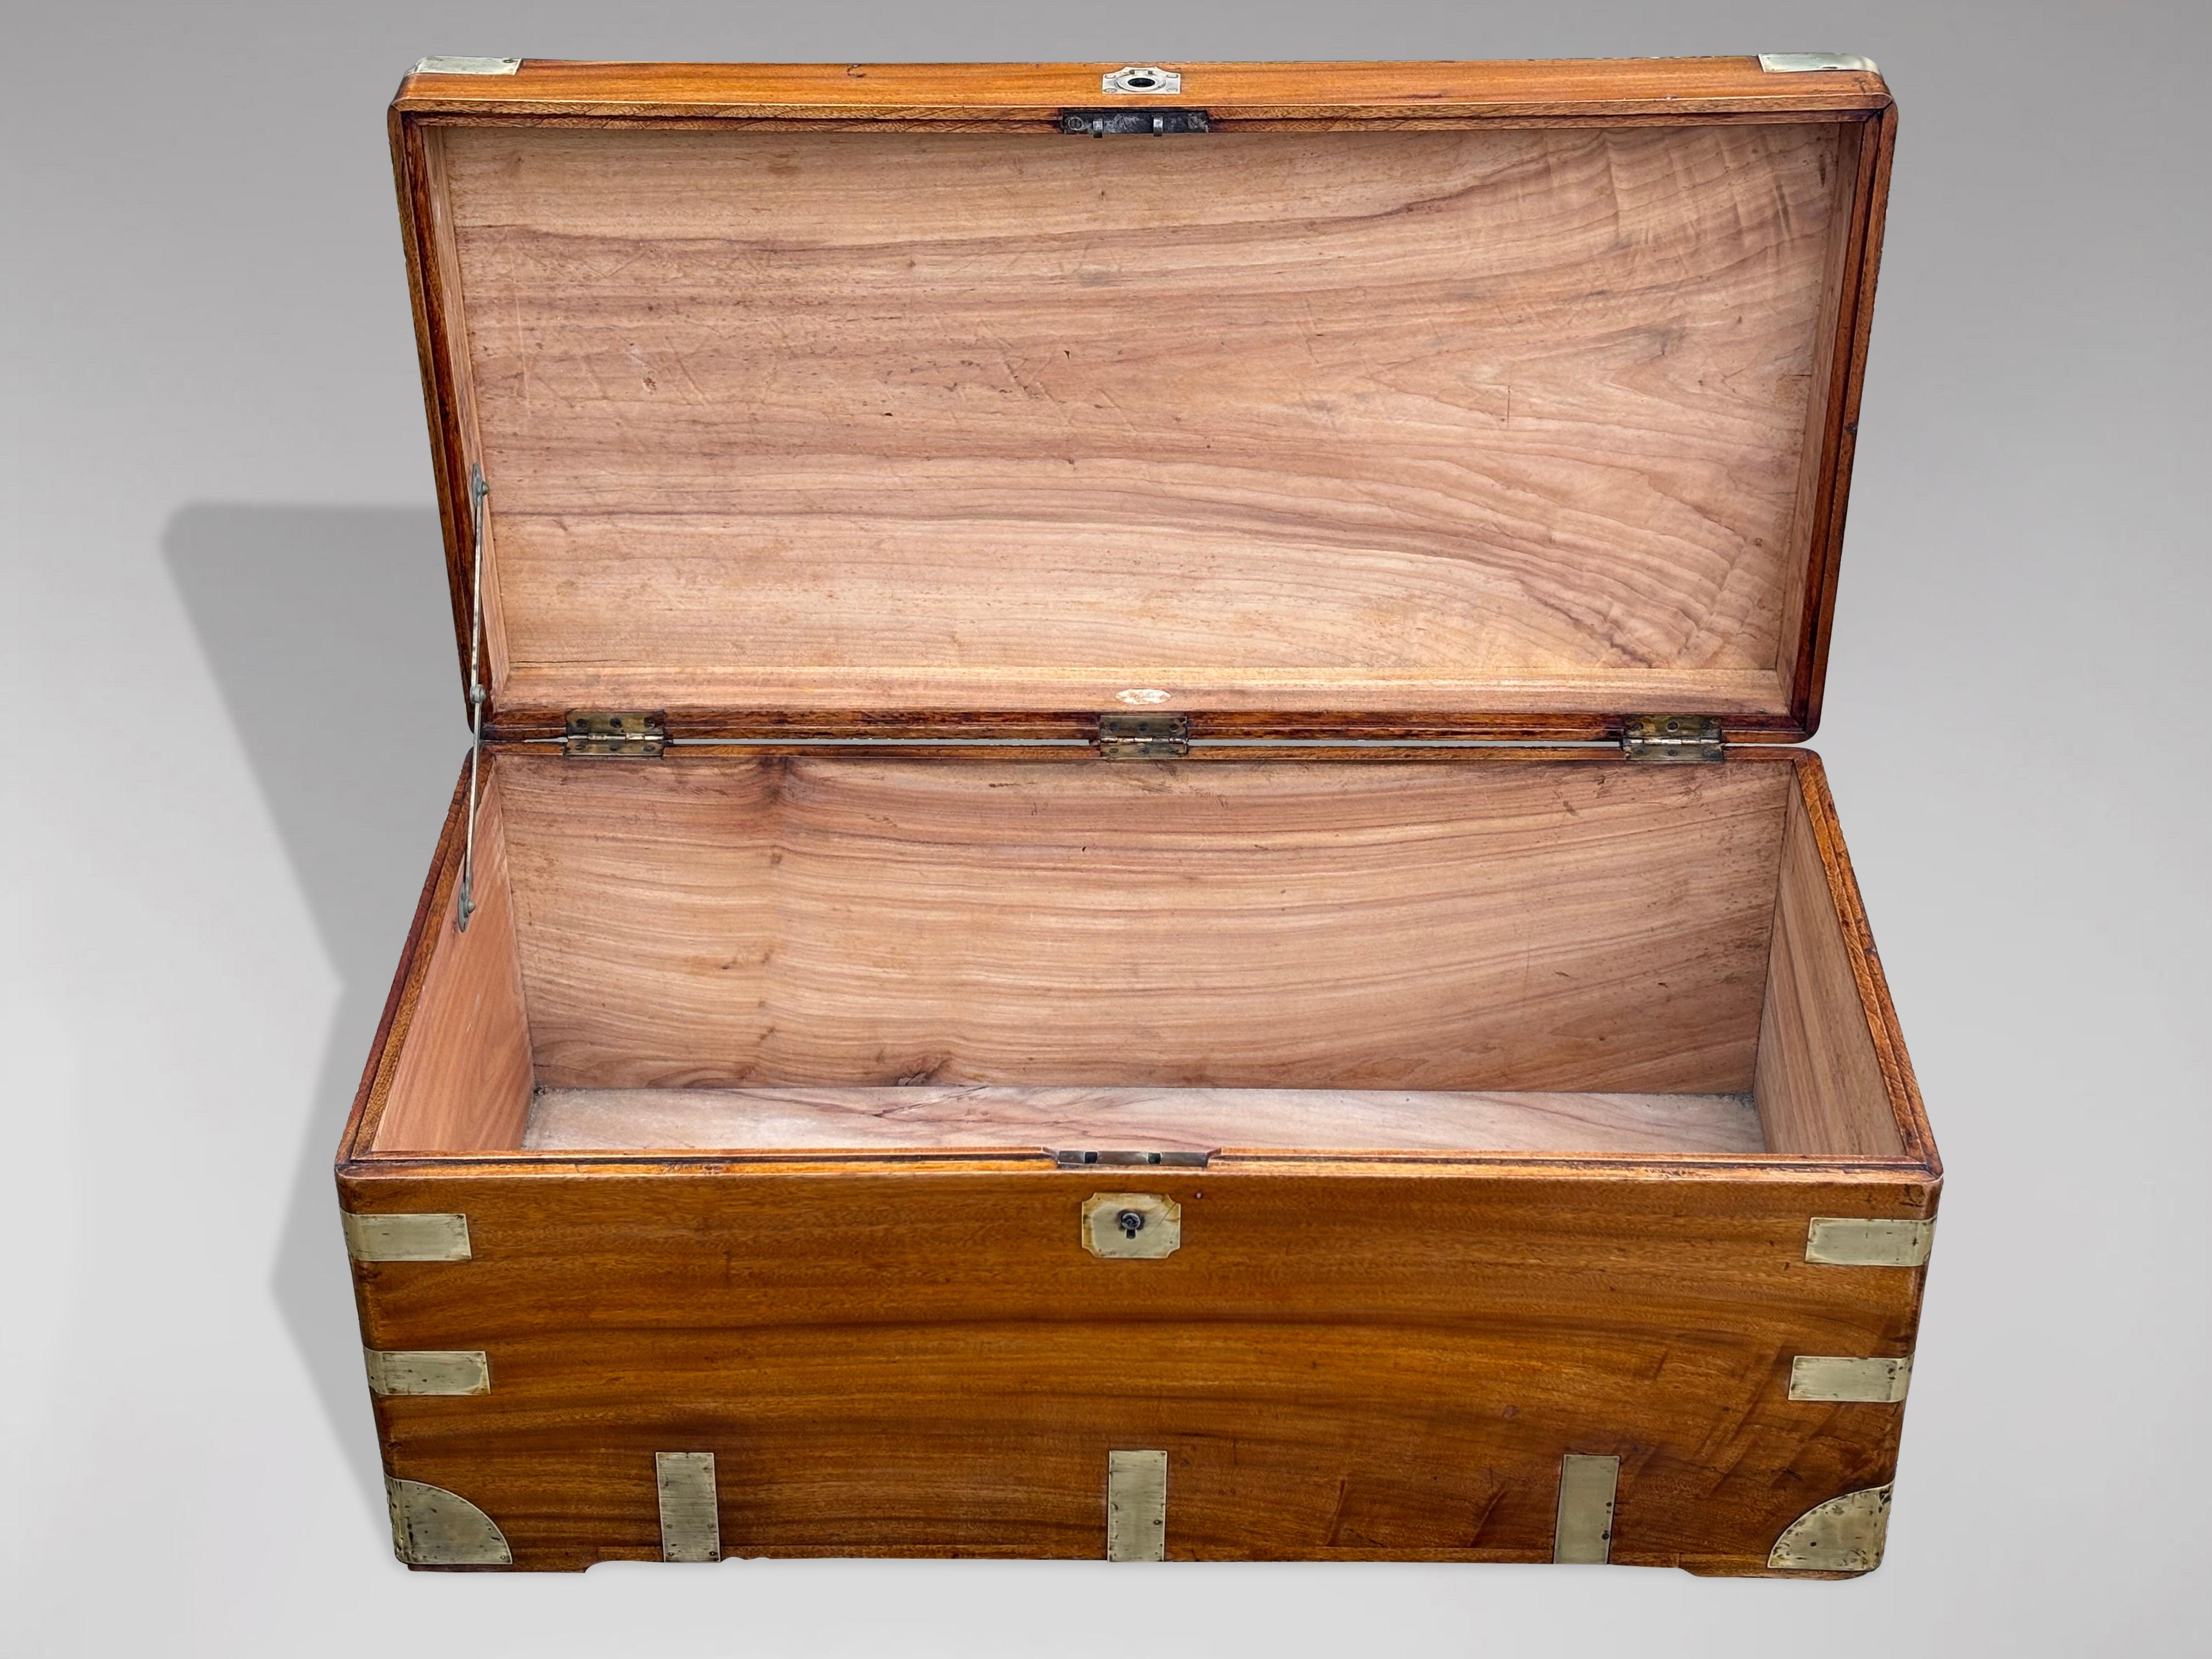 British Large 19th Century Camphor Wood Trunk or Chest For Sale